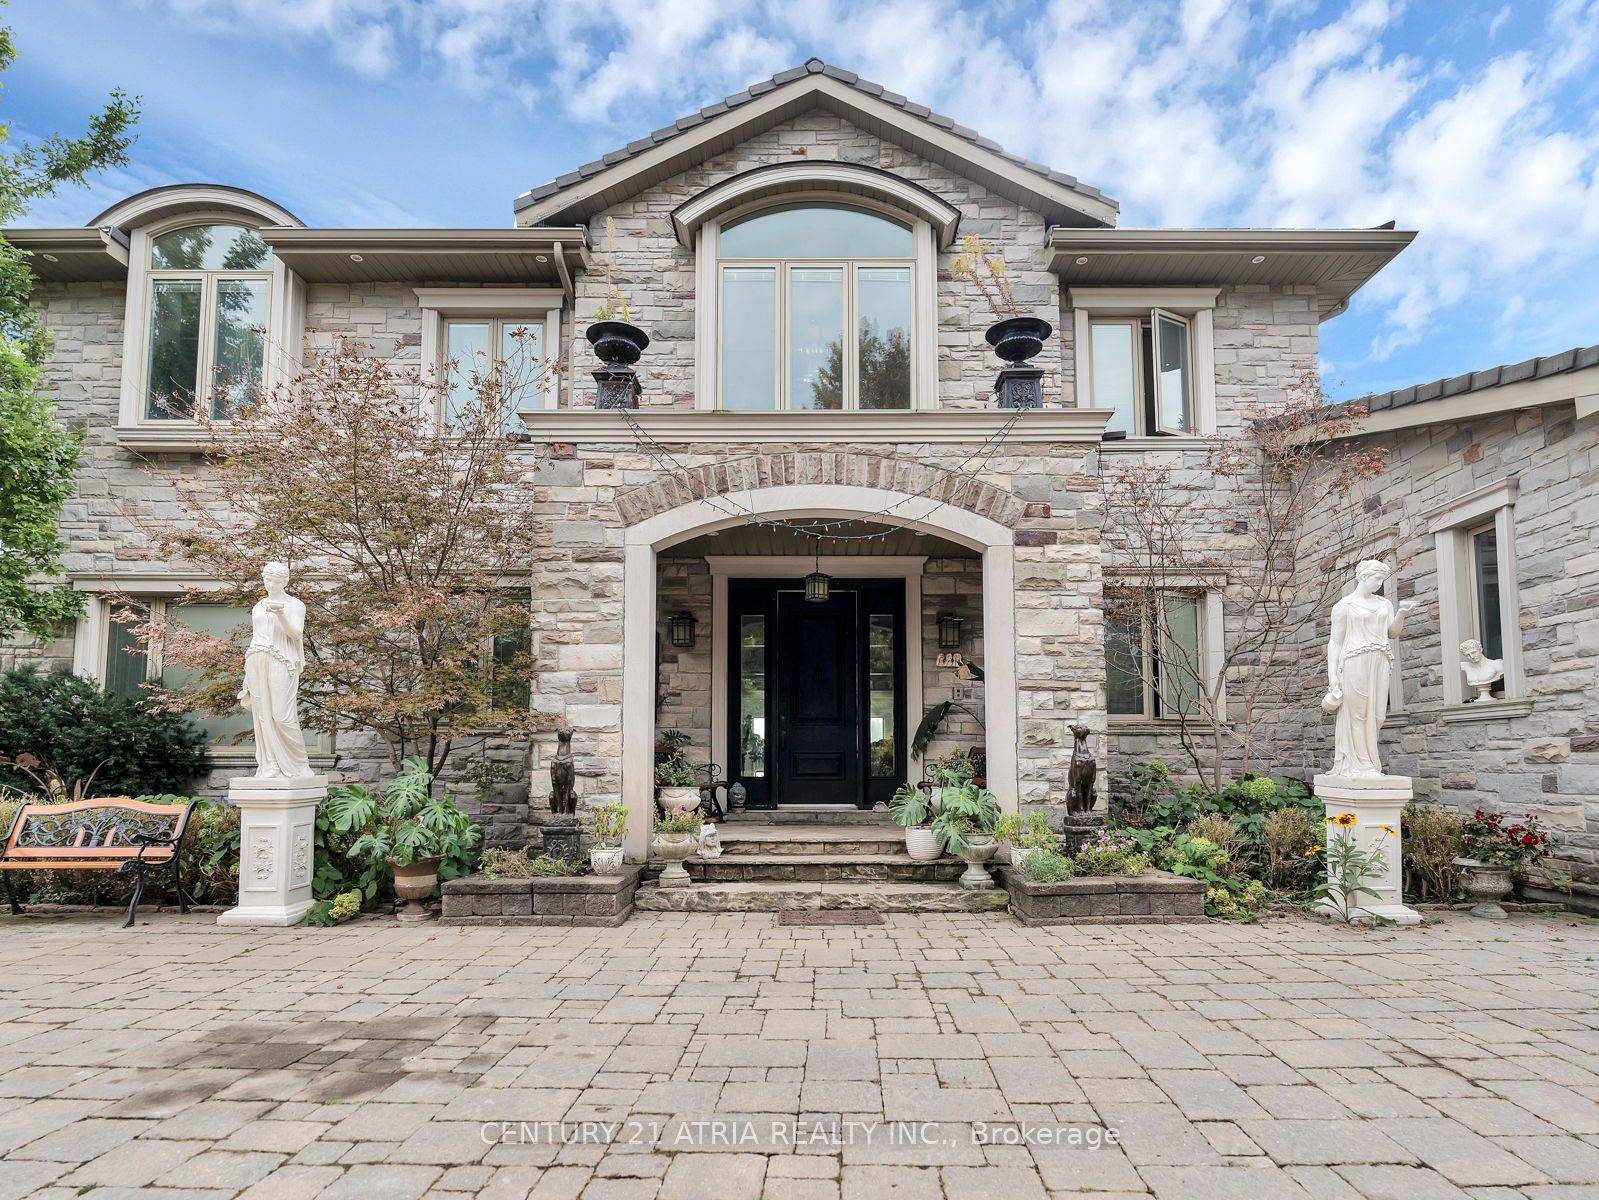 Situated in Scarborough Village, 41 Hill Crescent, Toronto, ON, unfolds luxury across aprx 10, 000 sqft of refined living space.